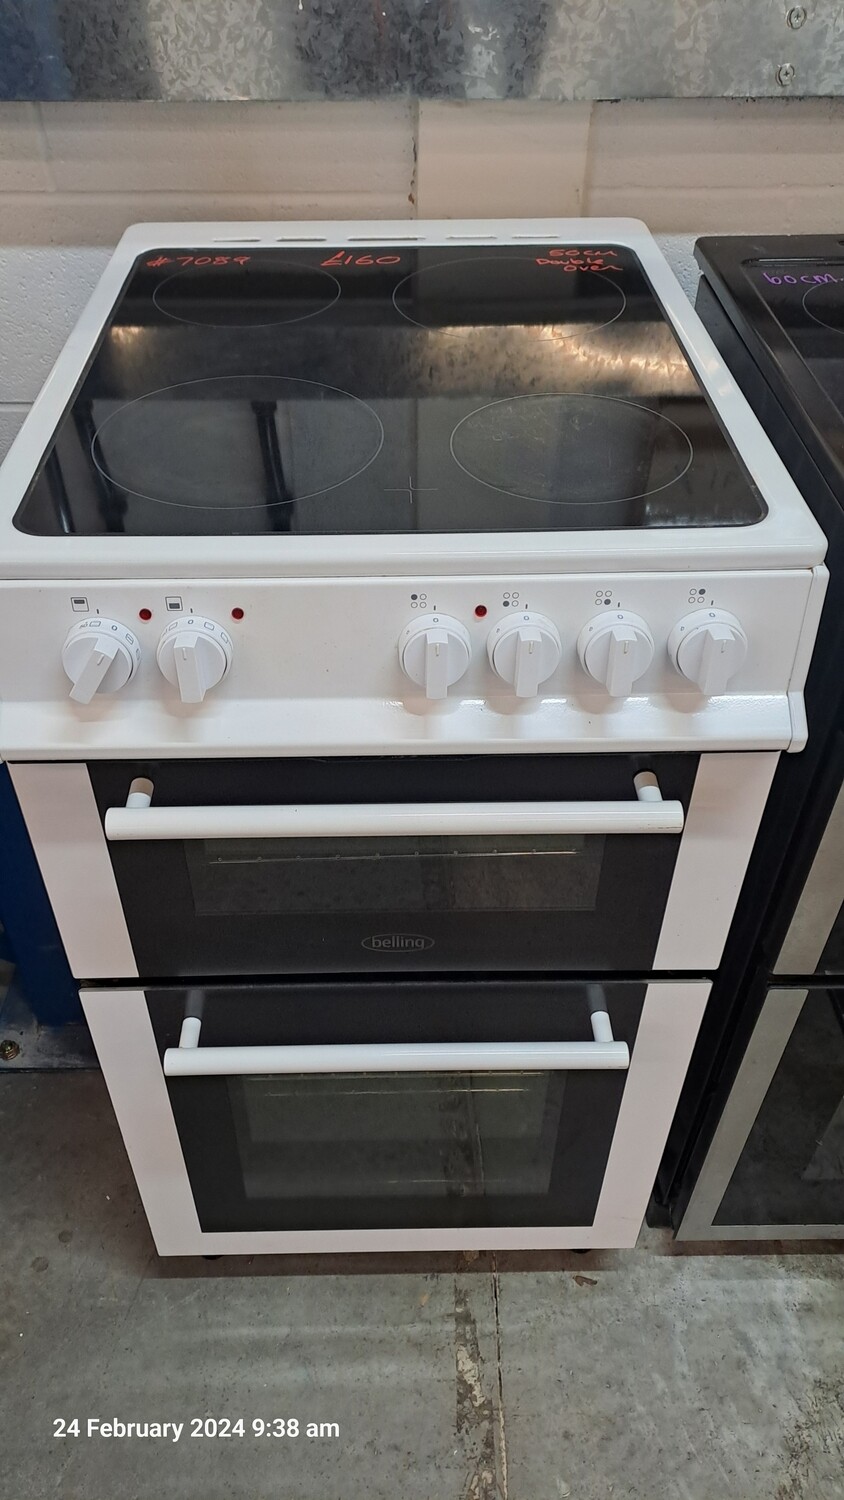 Belling BFSE52DOC 50cm Electric cooker Double Oven Ceramic Hob White Located in Whitby Road shop